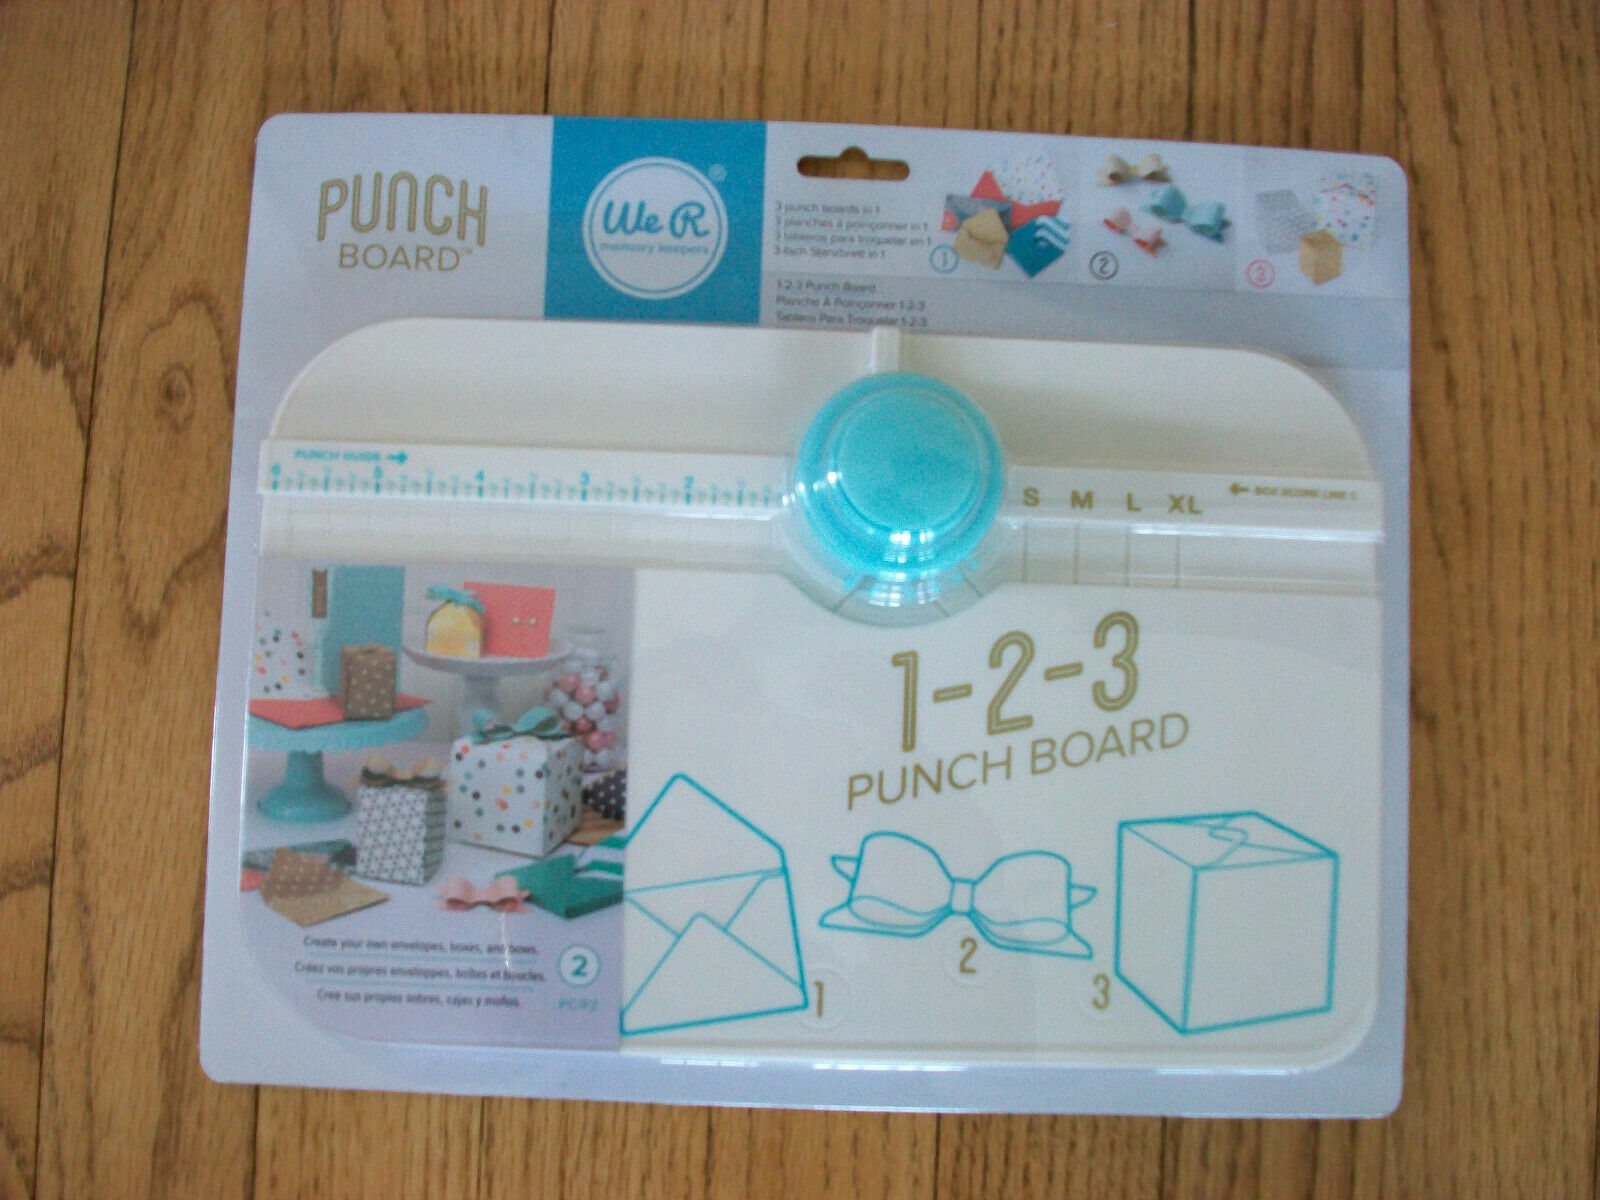 New We R Memory Keepers 1-2-3 Punch Board Create Boxes, Bows & Envelopes